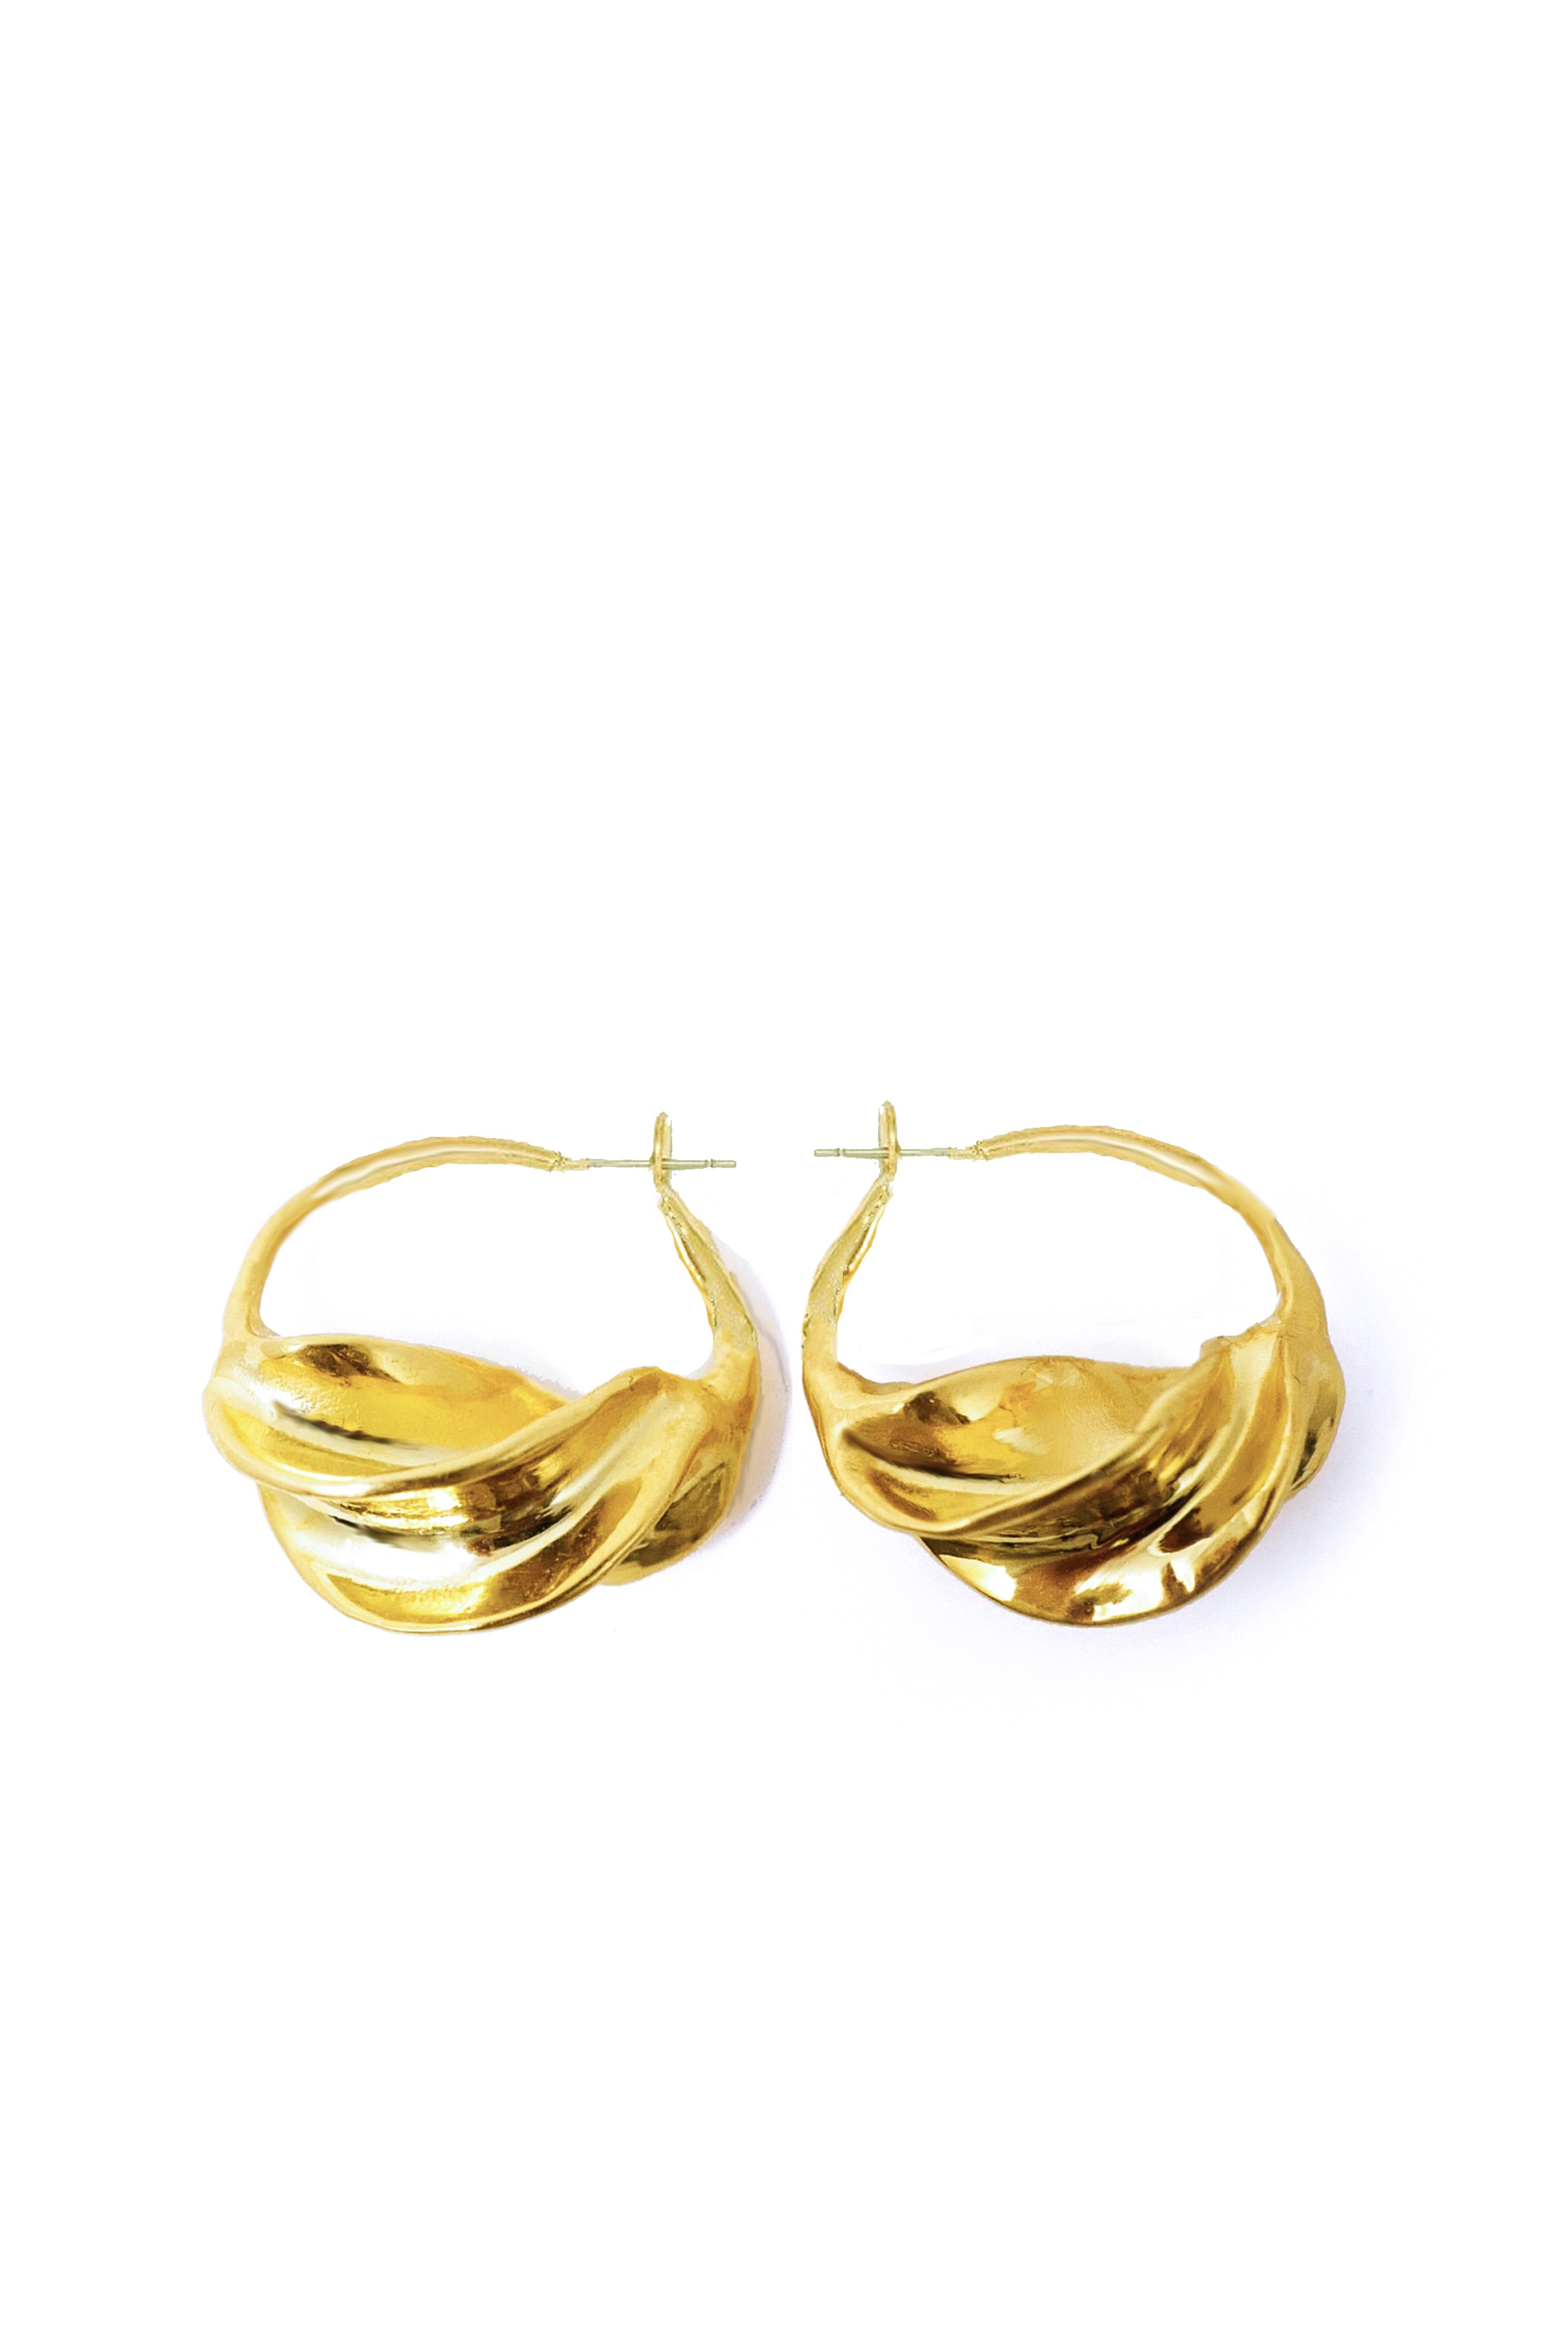 THE FULA Earrings with Spring Back